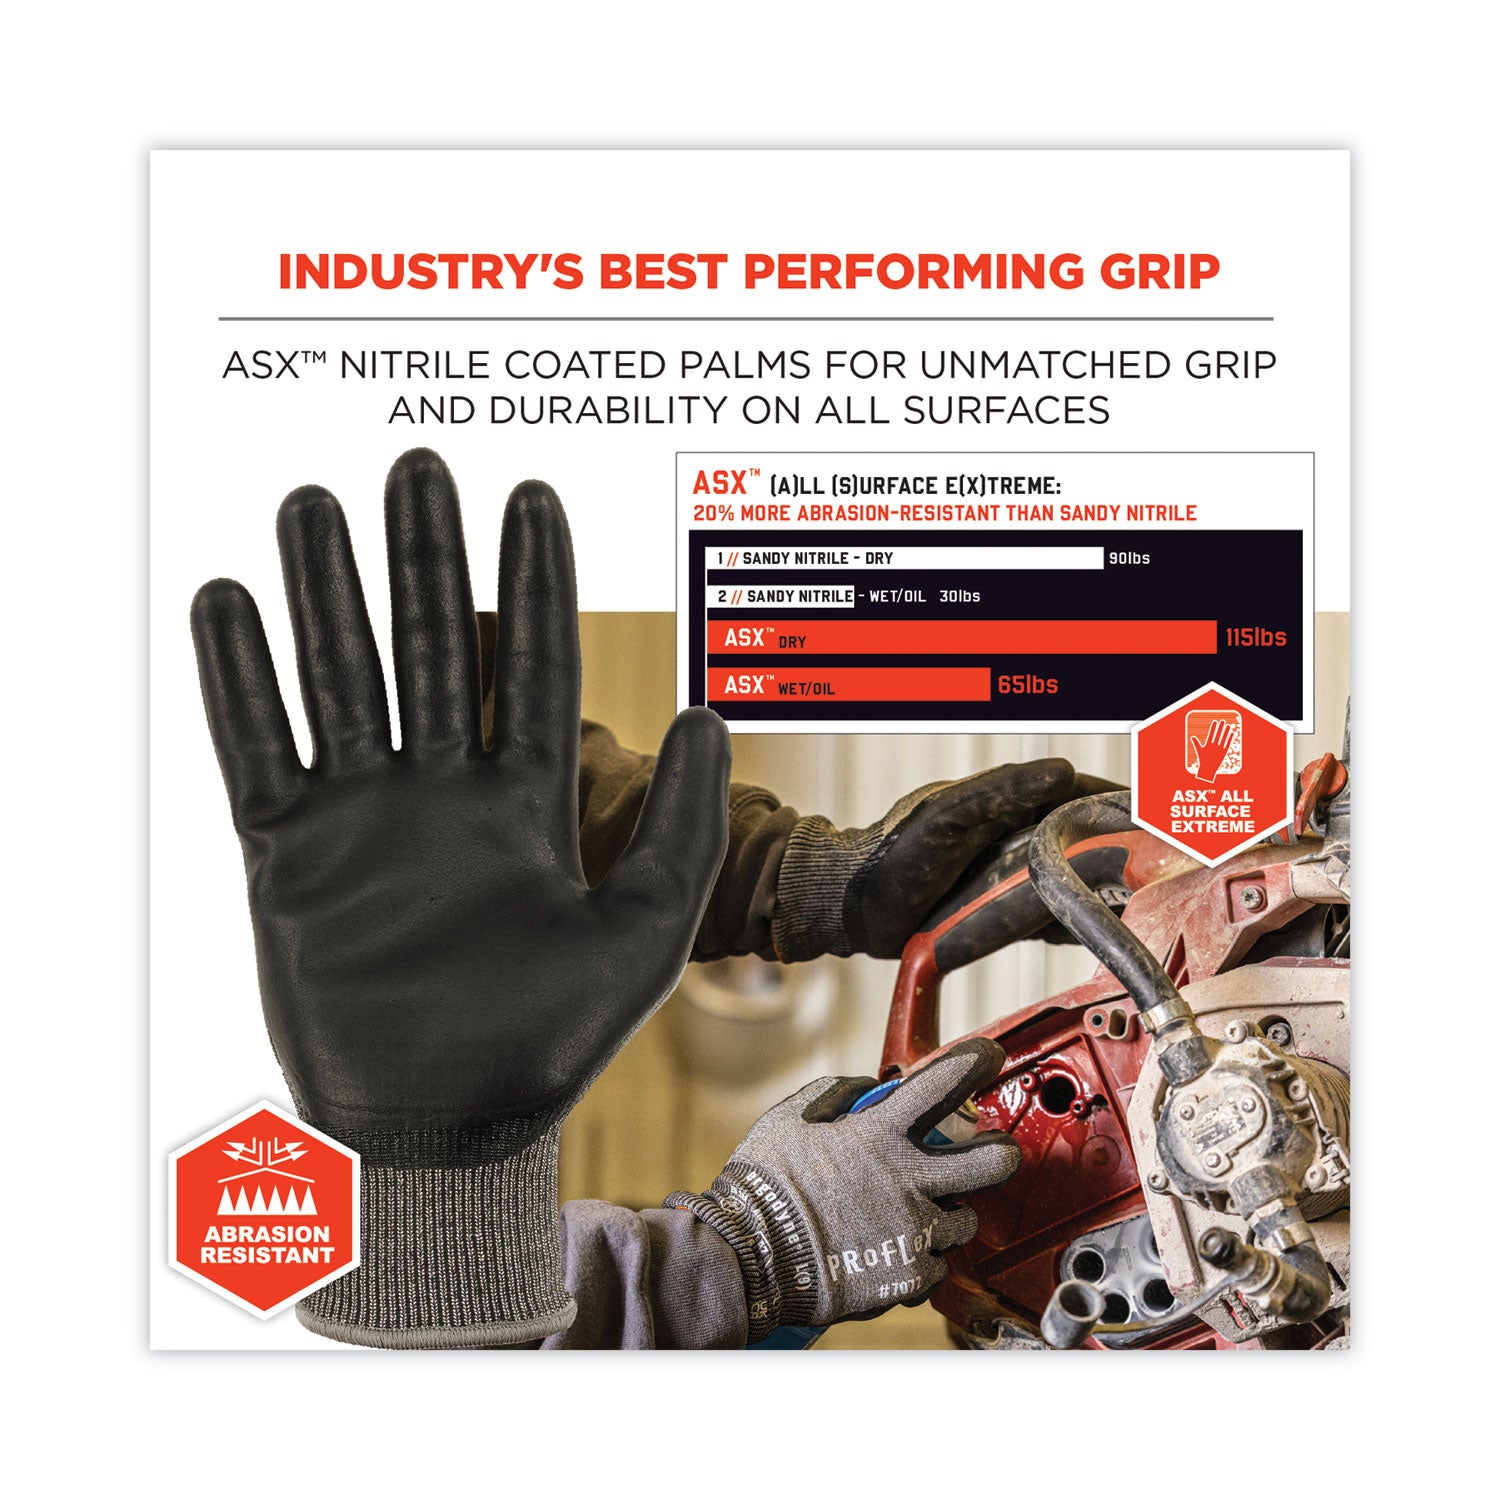 proflex-7072-ansi-a7-nitrile-coated-cr-gloves-gray-2x-large-pair-ships-in-1-3-business-days_ego10316 - 4